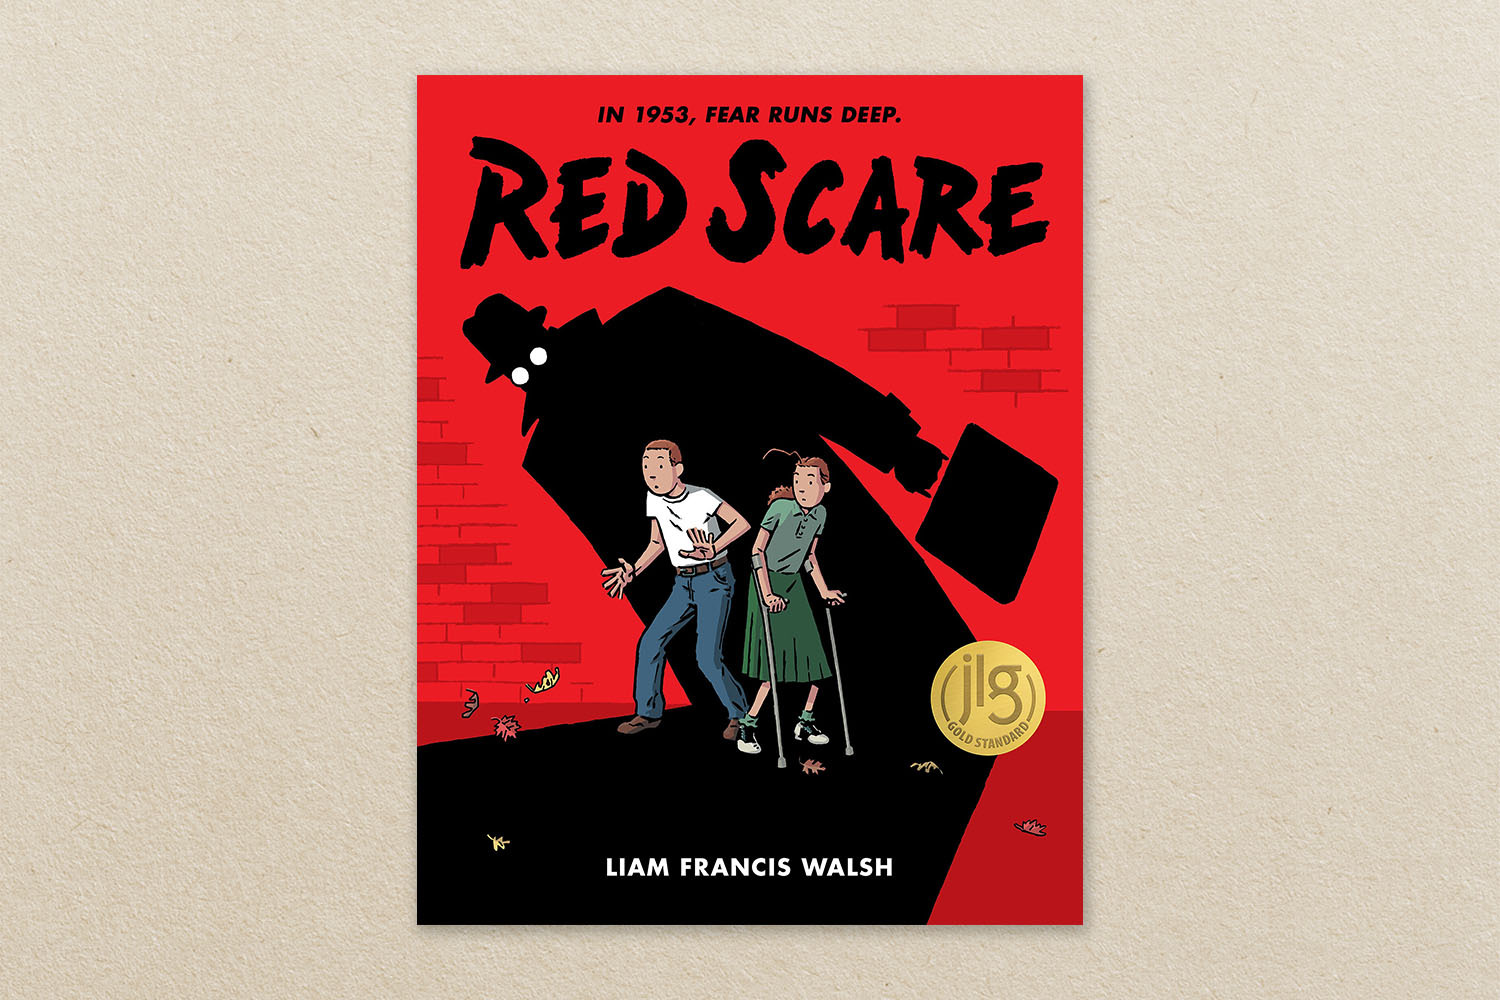 Red Scare: A Graphic Novel book on beige background